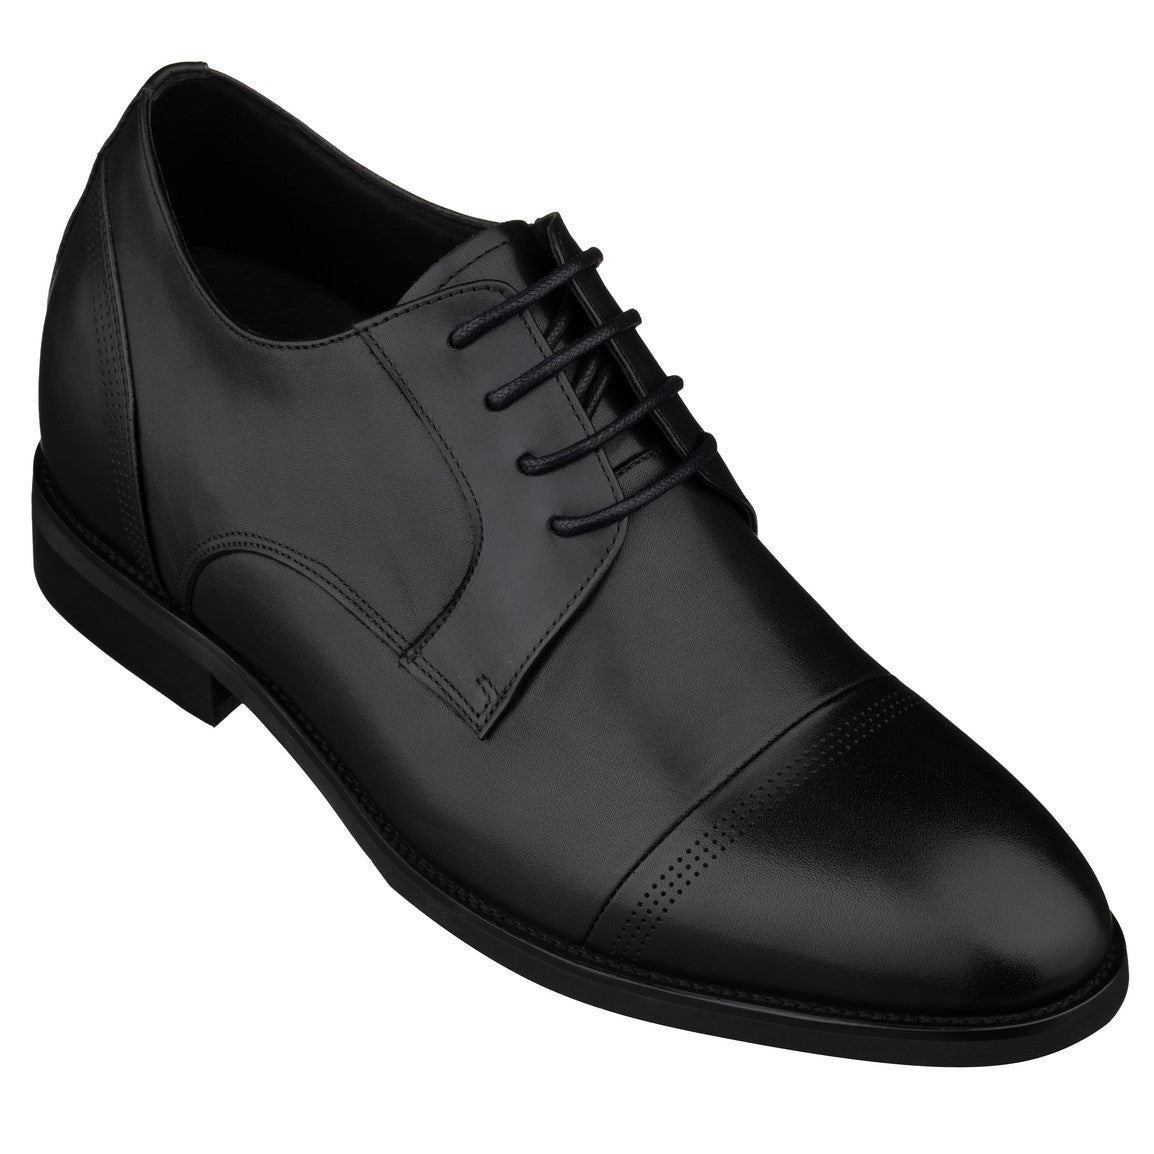 Elevator shoes height increase TOTO - K9277 - 2.8 Inches Taller (Black) - Dress Oxford